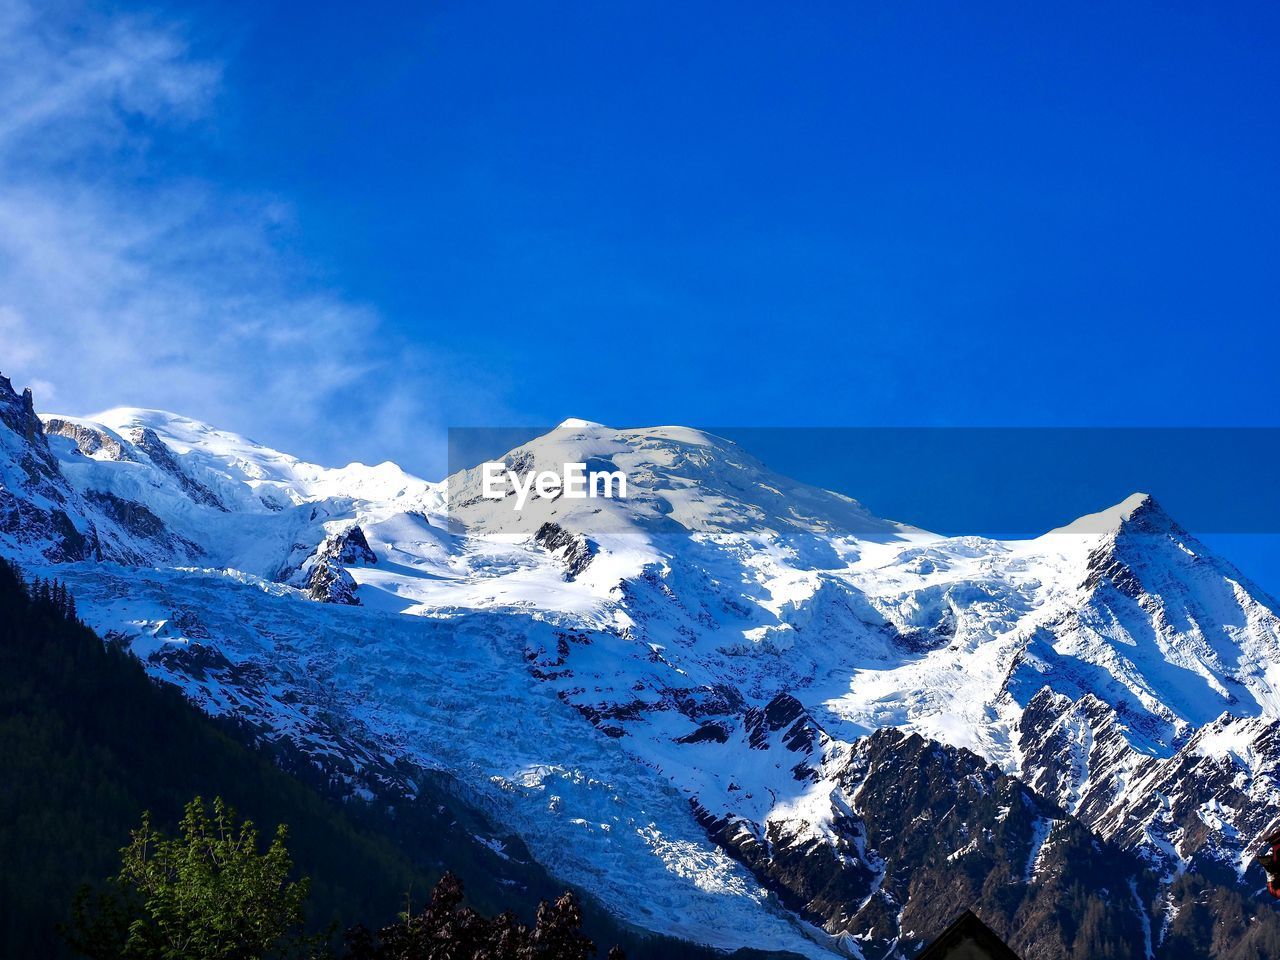 snow, mountain, cold temperature, winter, scenics - nature, snowcapped mountain, mountain range, beauty in nature, sky, environment, landscape, nature, blue, mountain peak, no people, travel destinations, tranquil scene, travel, tranquility, outdoors, cloud, sports, ice, massif, land, activity